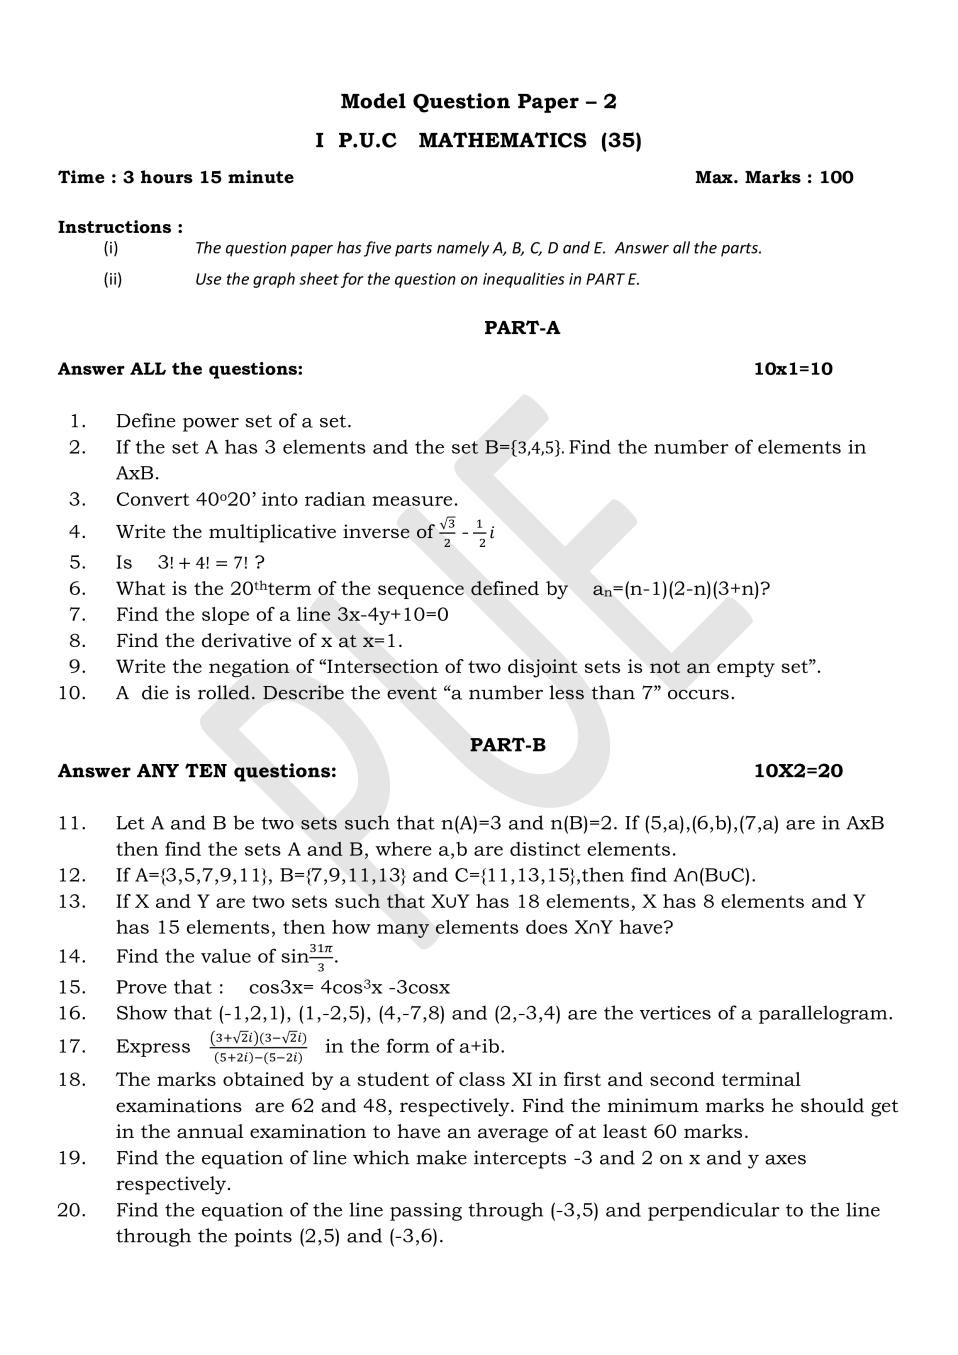 Karnataka 1st PUC Model Question Paper for Maths Set 2 - Page 1